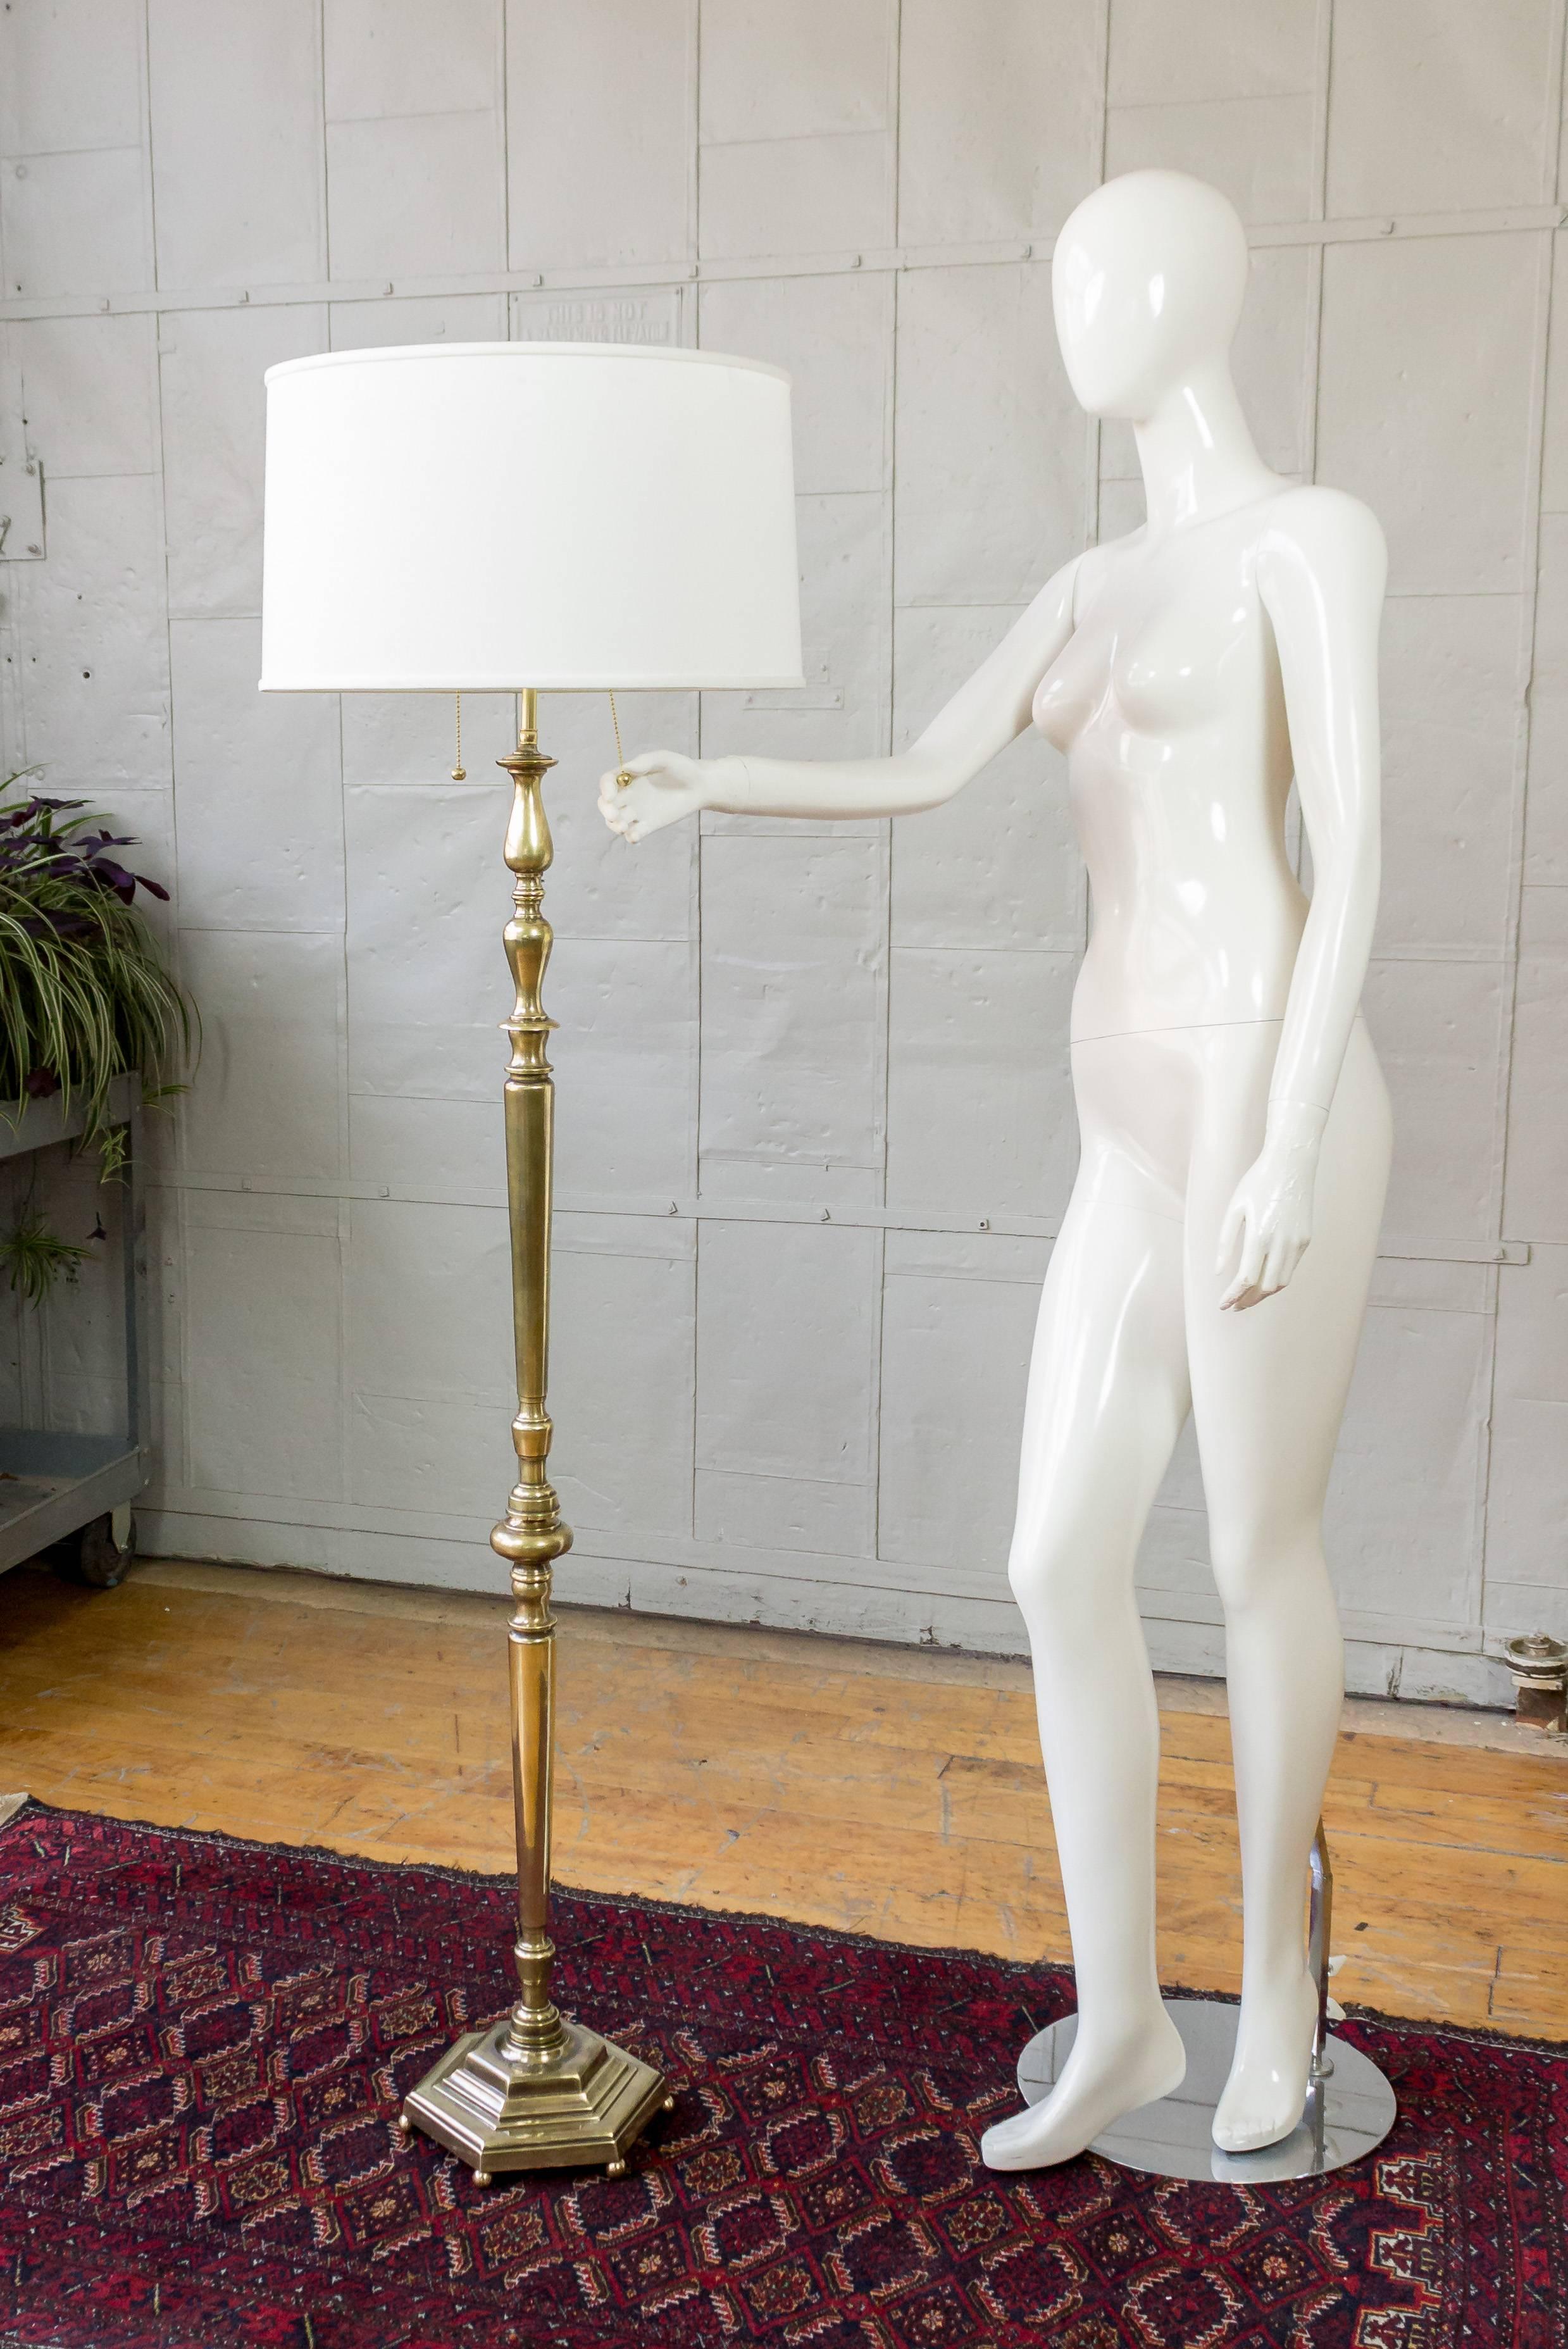 Recently refinished handsome brass floor lamp with turned and cast bronze parts. The hand finished finish shows variations in the patina to bring out the age of the piece but overall the lamp retains a butler or English brass tone. The floor lamp